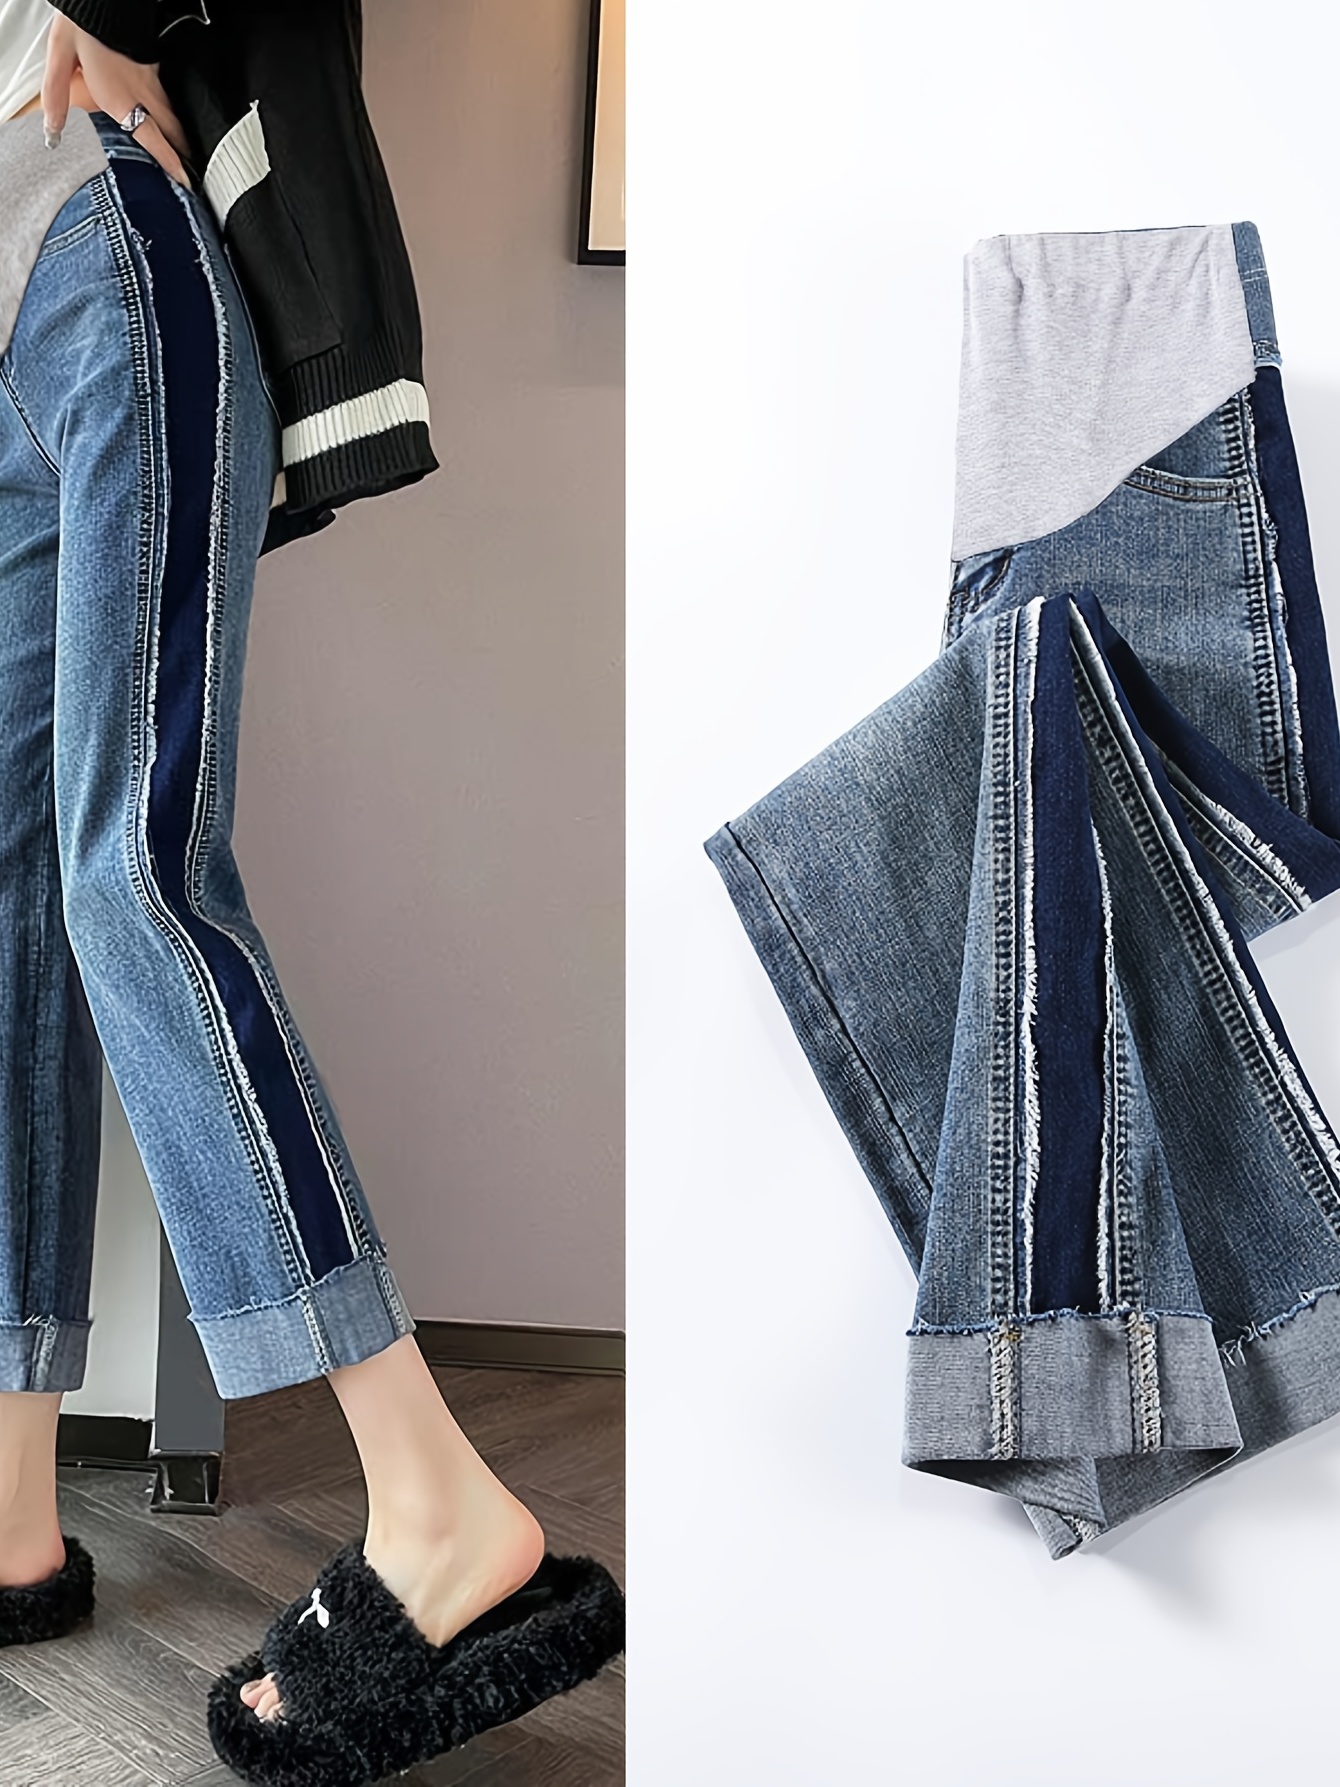 Women's Maternity Denim Pants Solid Vintage Style Jeans Highly Stretchy  Pants For Pregnant Women